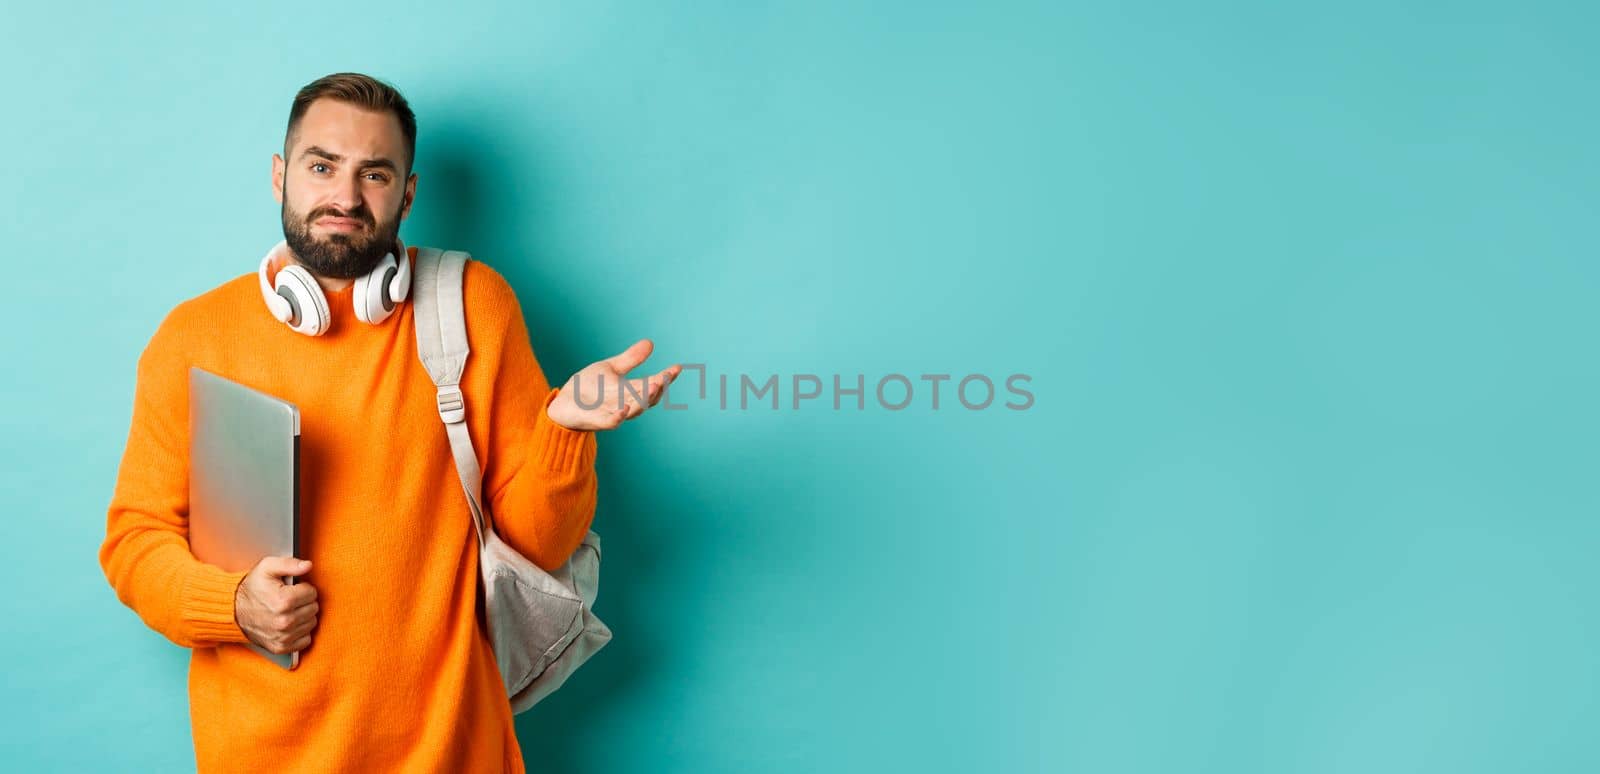 Image of troubled young man with headphones and backpack, shrugging confused and holding laptop, standing over light blue background.